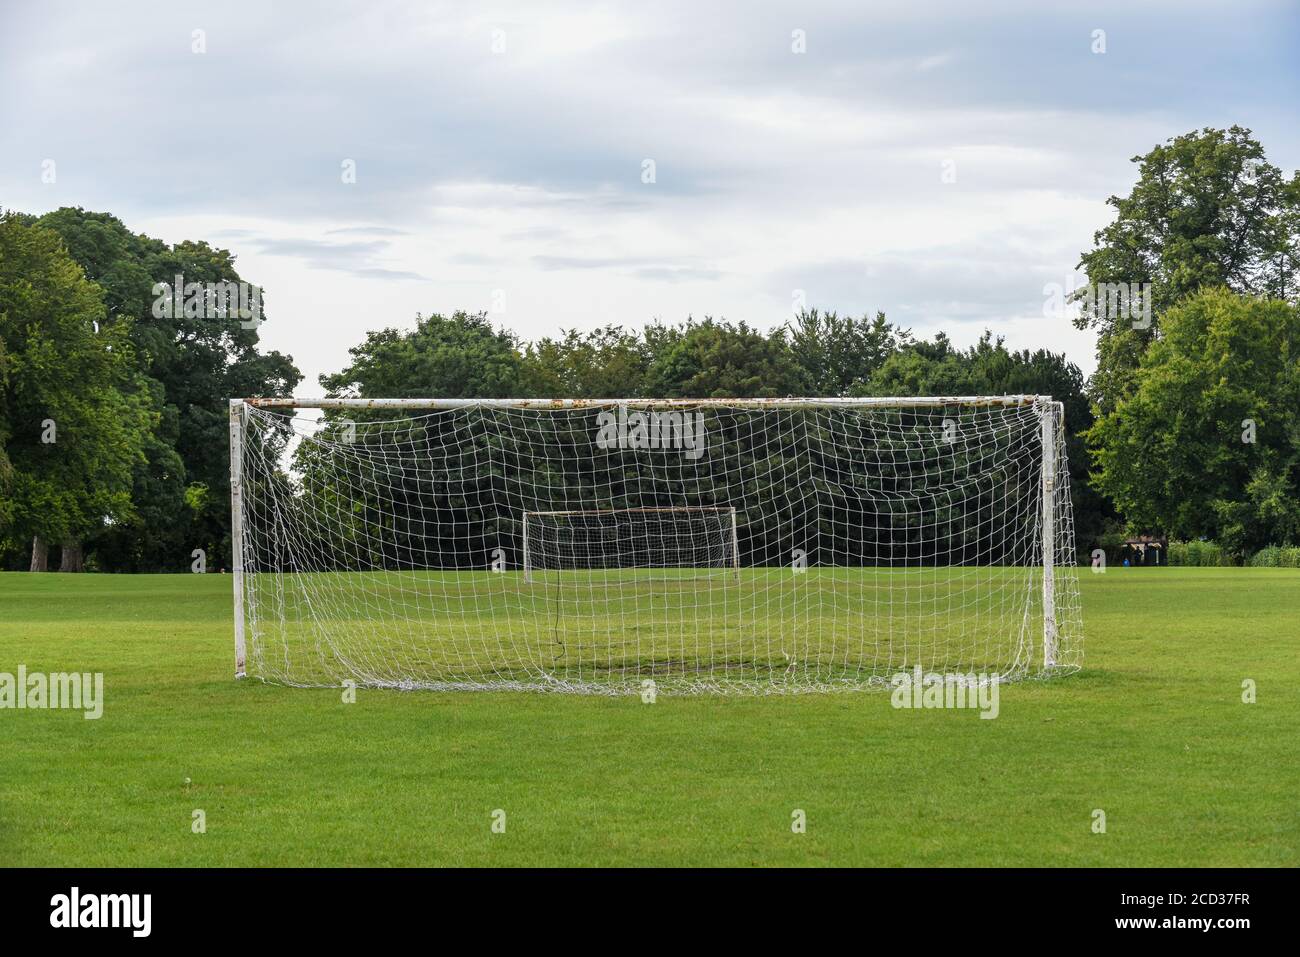 Outdoor football pitch with goals and soccer nets in public park Stock Photo